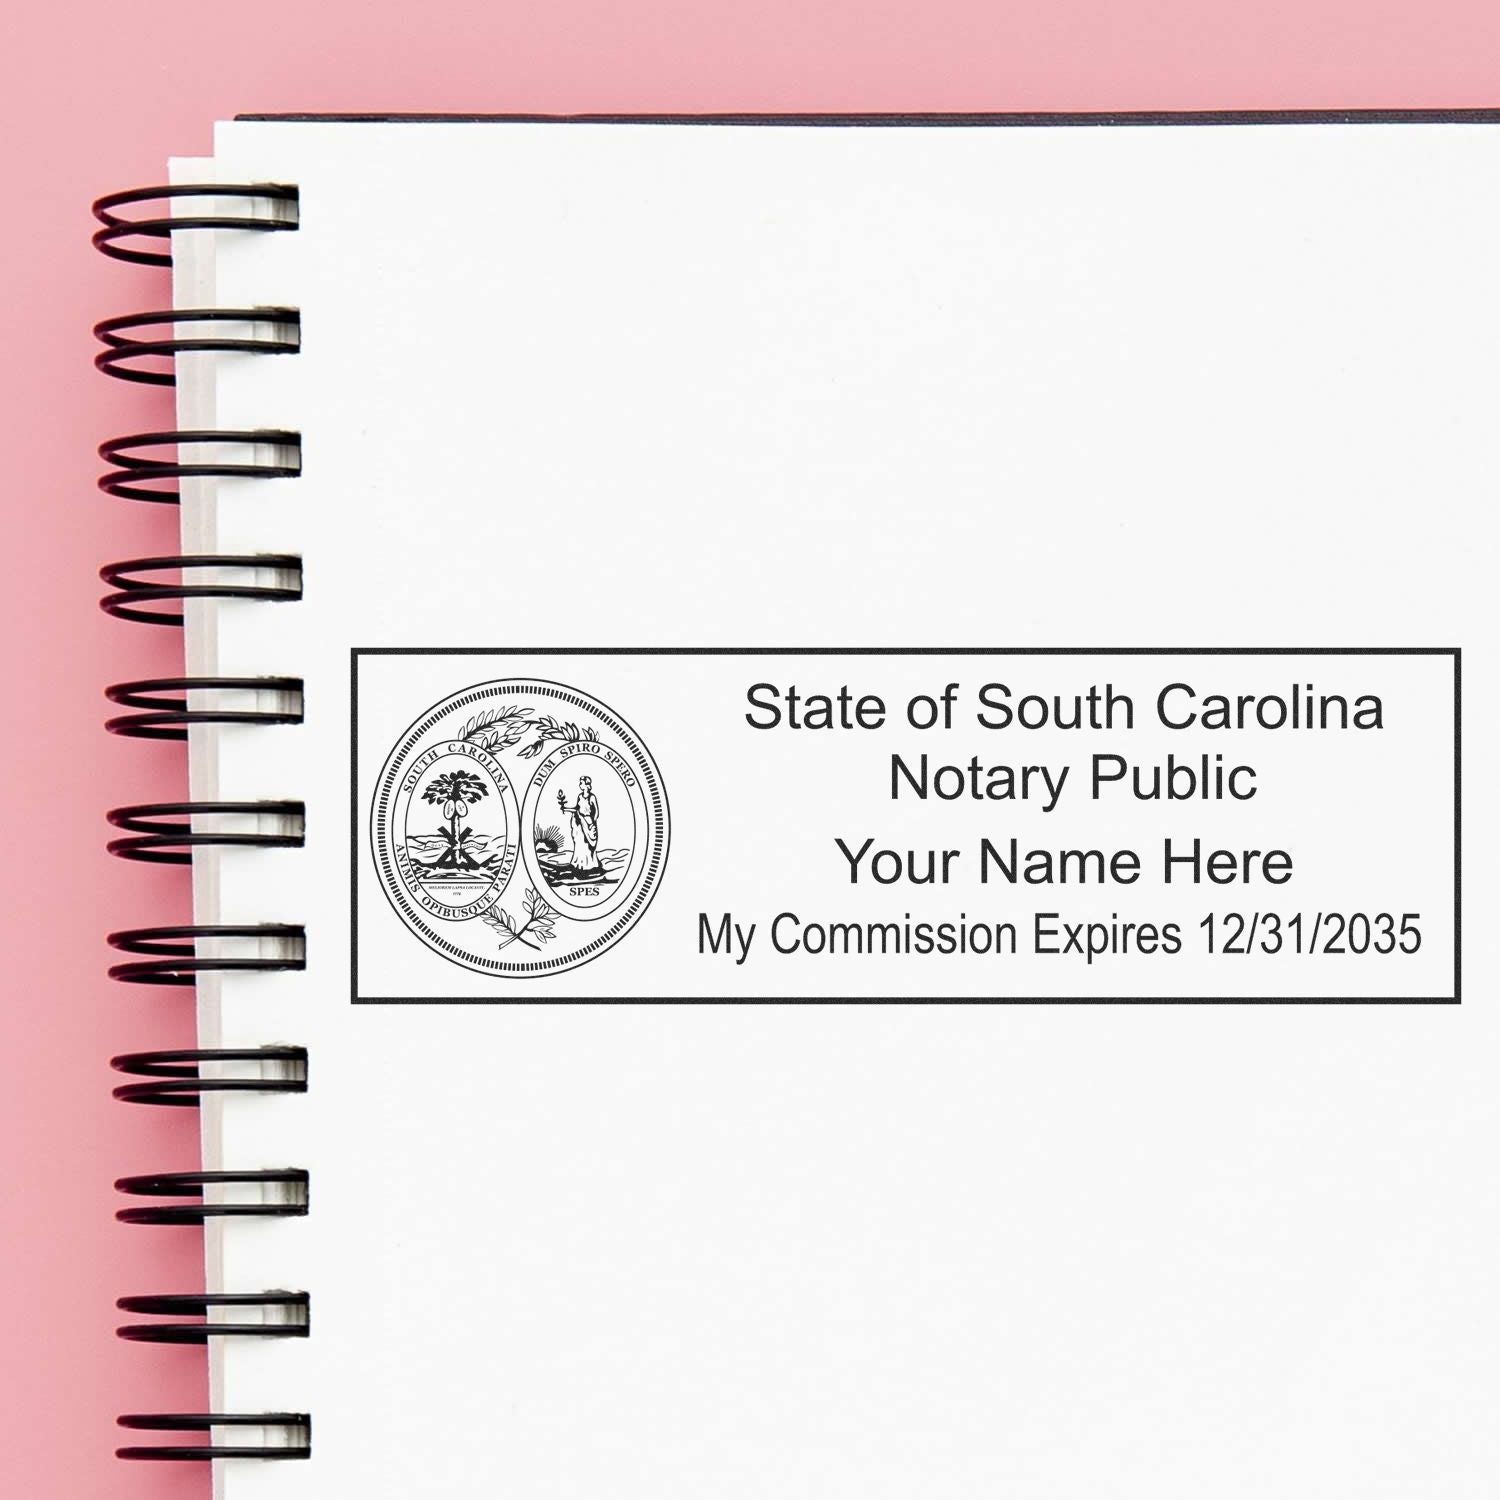 The Slim Pre-Inked State Seal Notary Stamp for South Carolina stamp impression comes to life with a crisp, detailed photo on paper - showcasing true professional quality.